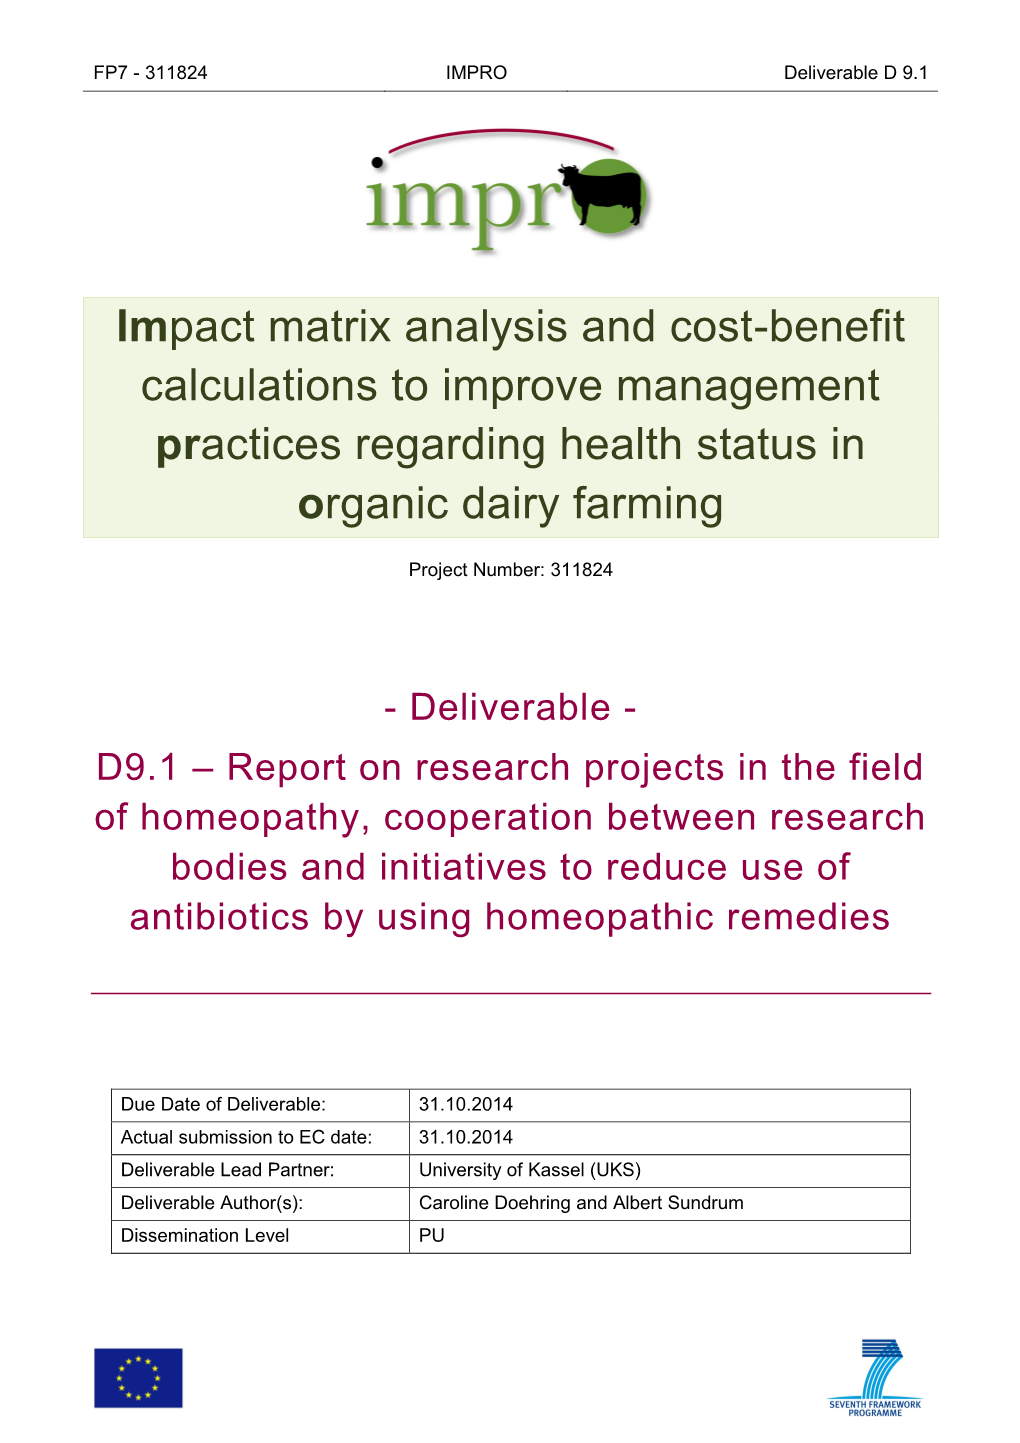 Impact Matrix Analysis and Cost-Benefit Calculations to Improve Management Practices Regarding Health Status in Organic Dairy Farming (IMPRO)